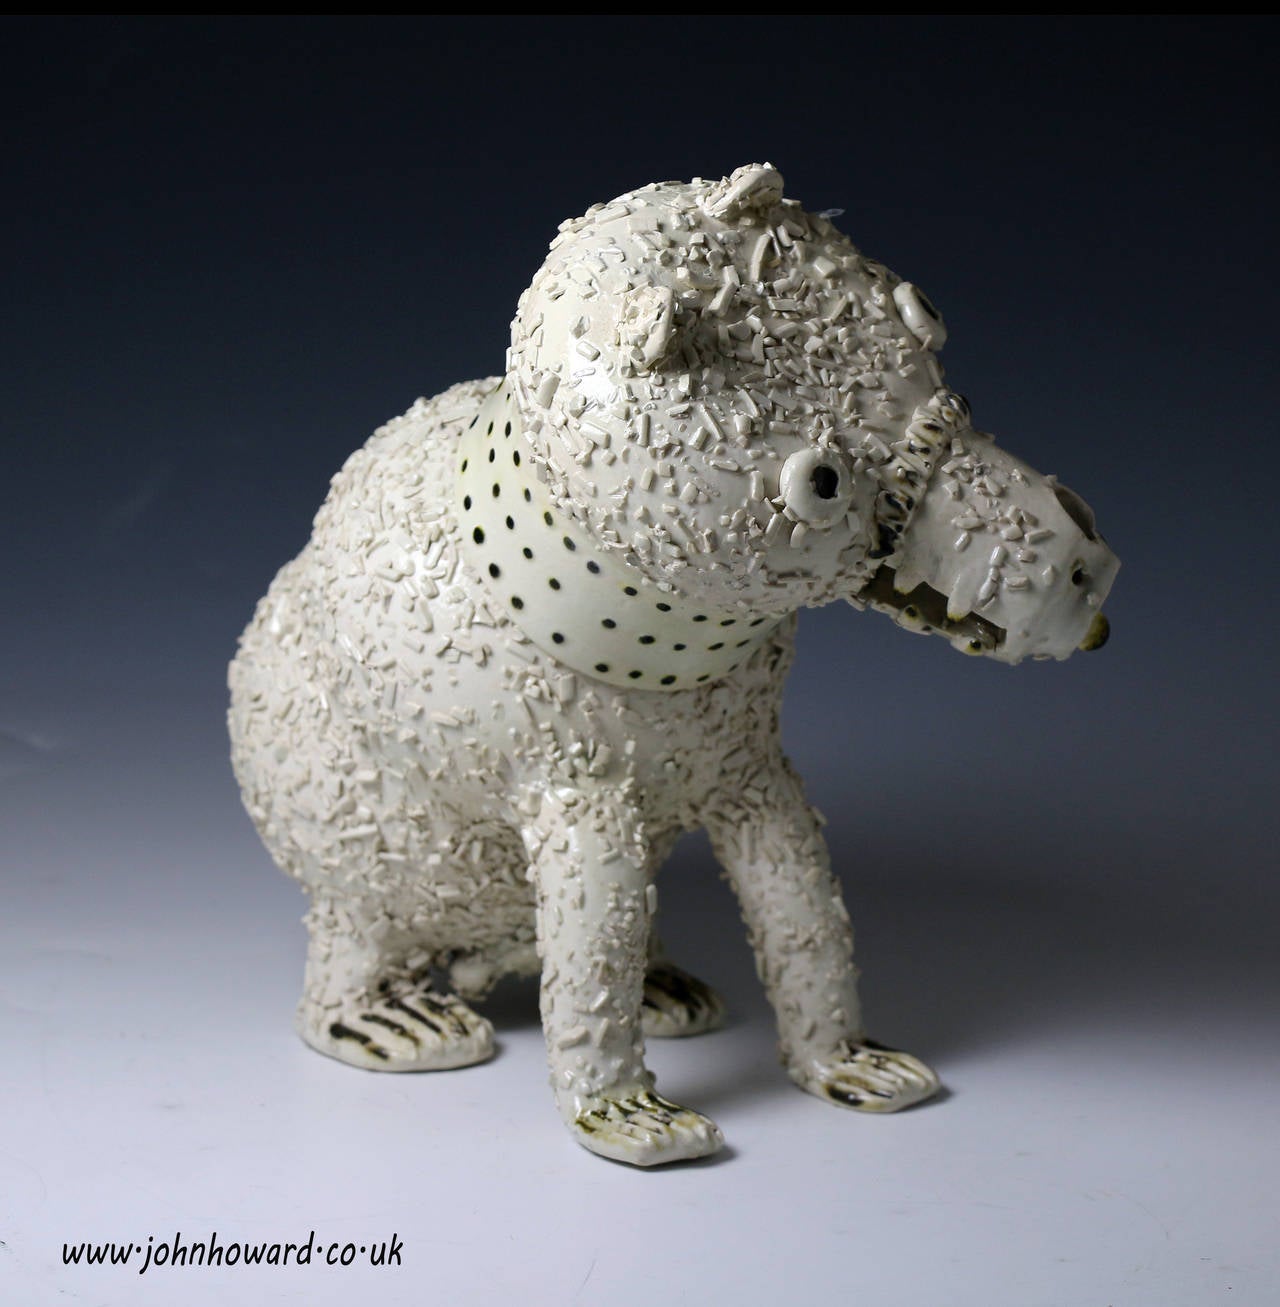 Antique Staffordshire stoneware saltglaze bear jug from the mid 18th century period. 
The figure is naively modelled and decorated with shredding representing the fur. 

Pure artistic form has a timeliness quality and this figure would take its